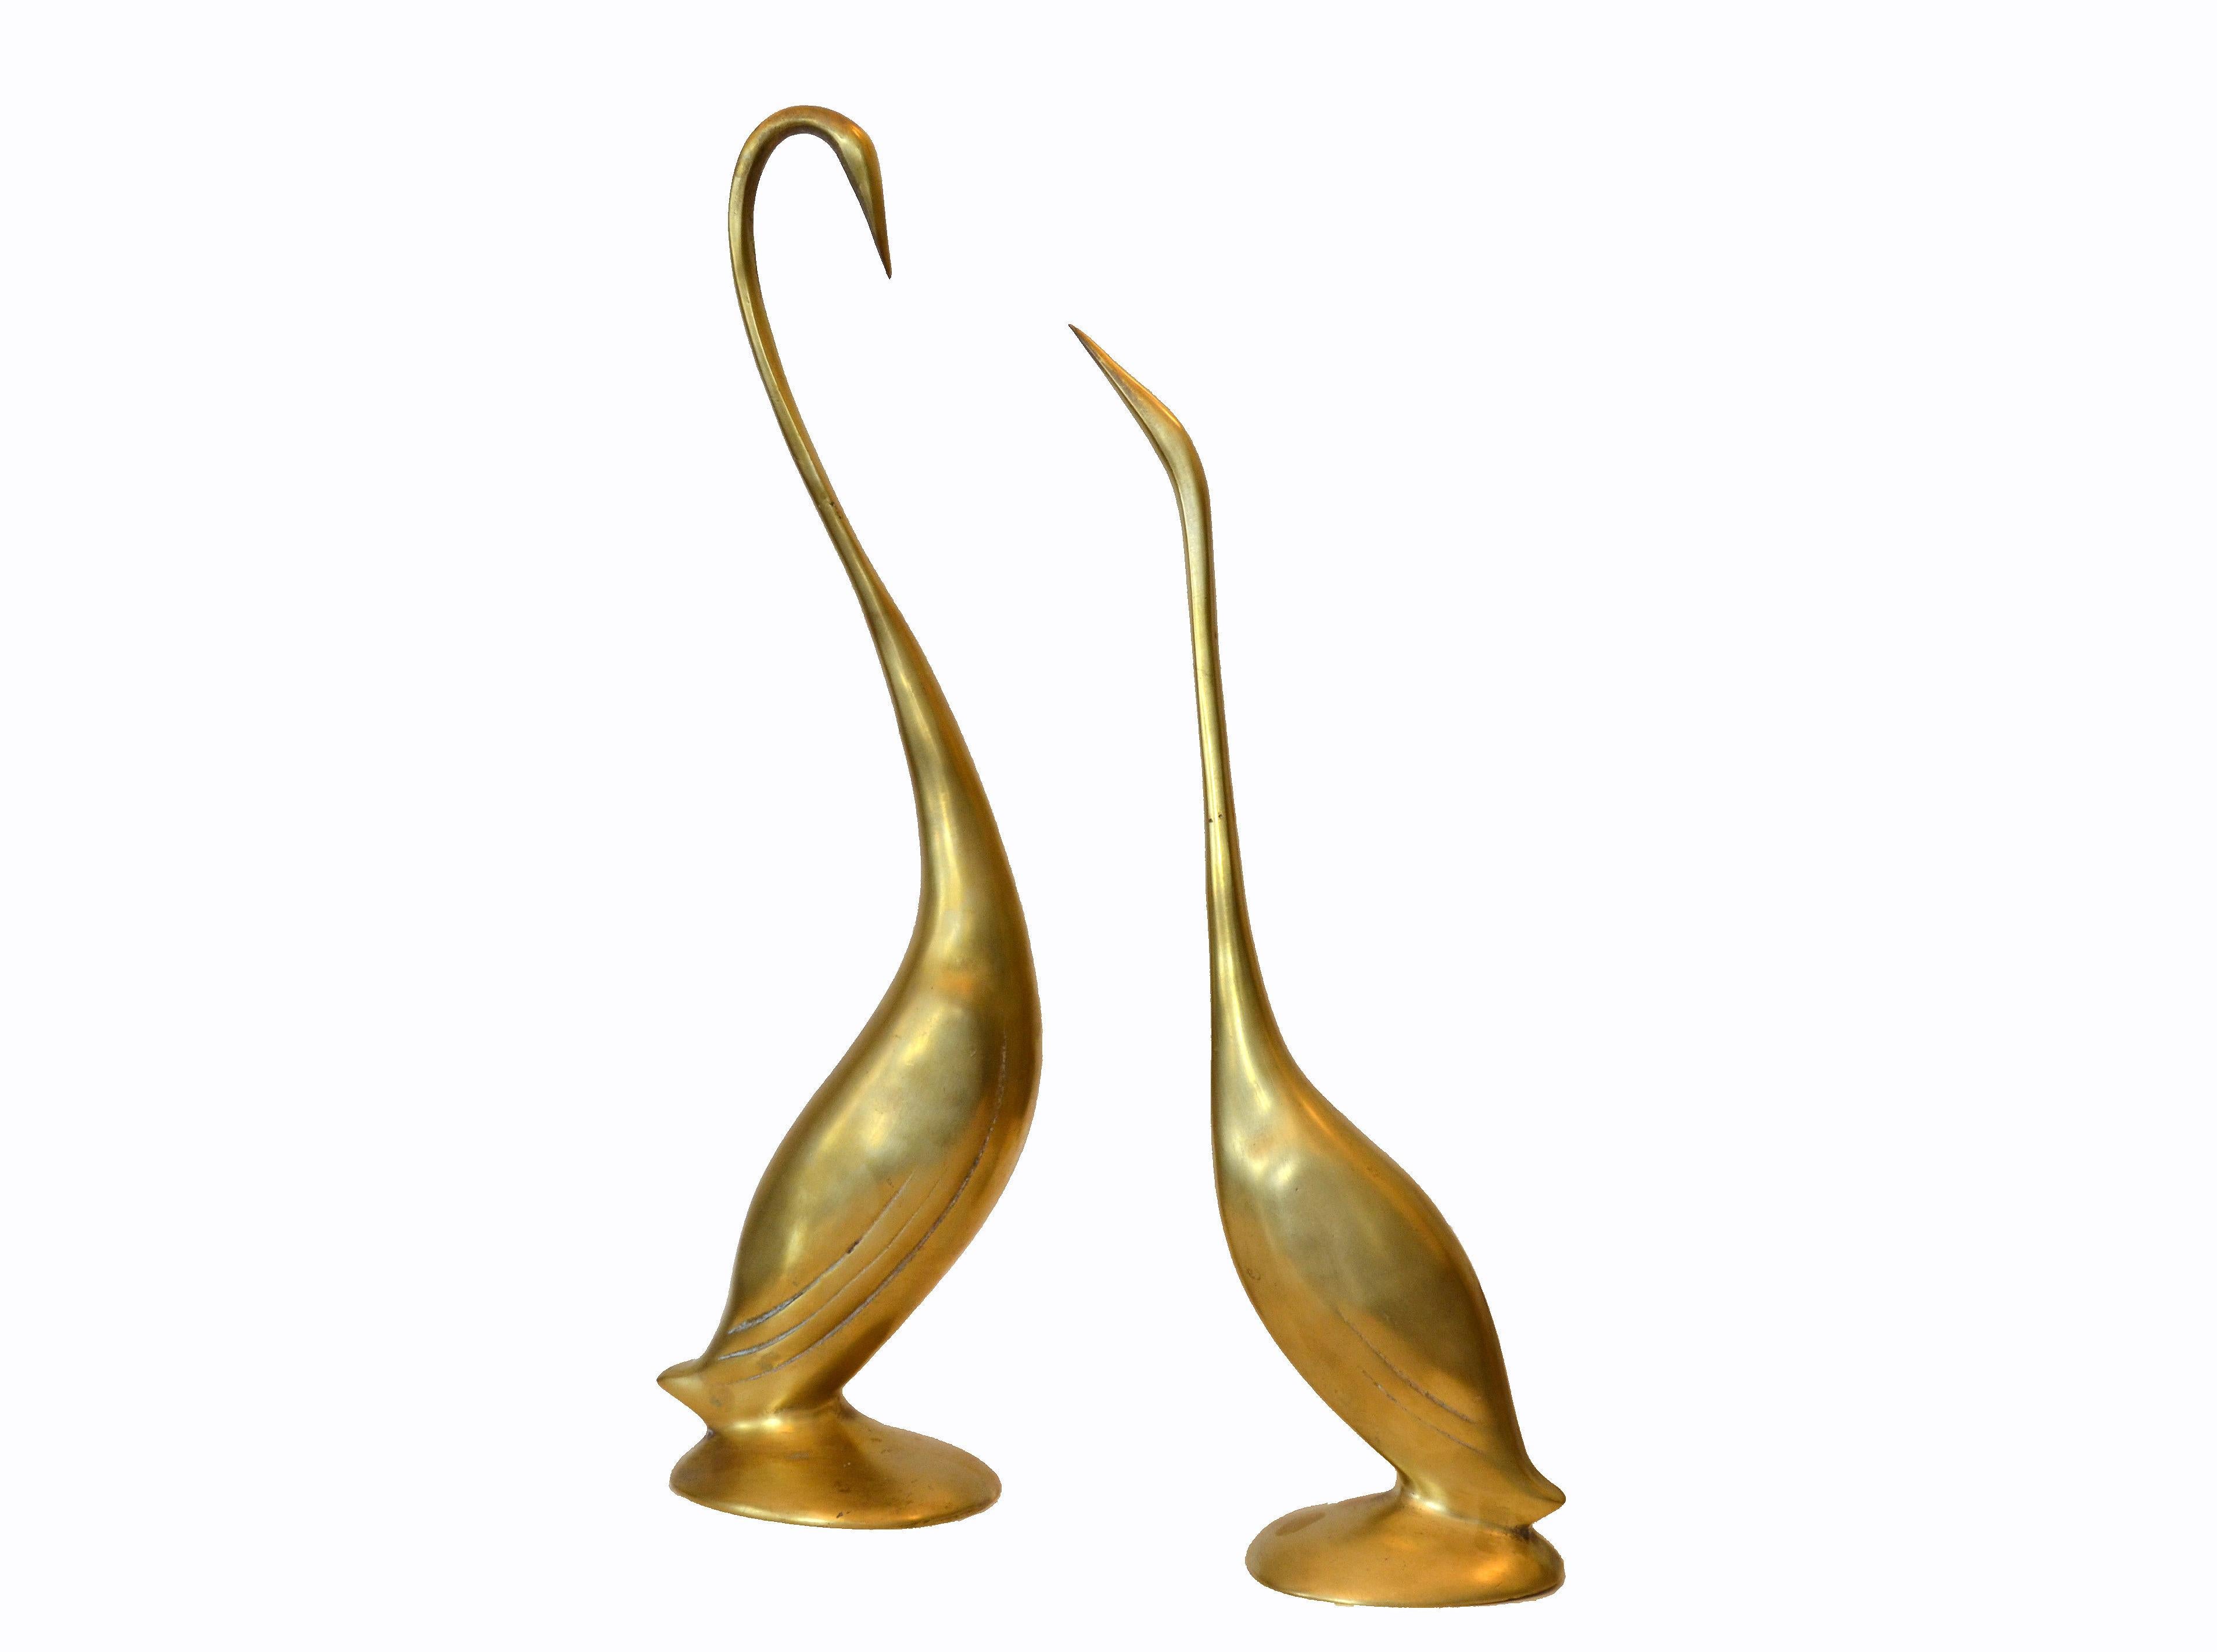 American Mid-Century Modern Stylized Cast Brass Herons Animal Sculptures, A Pair